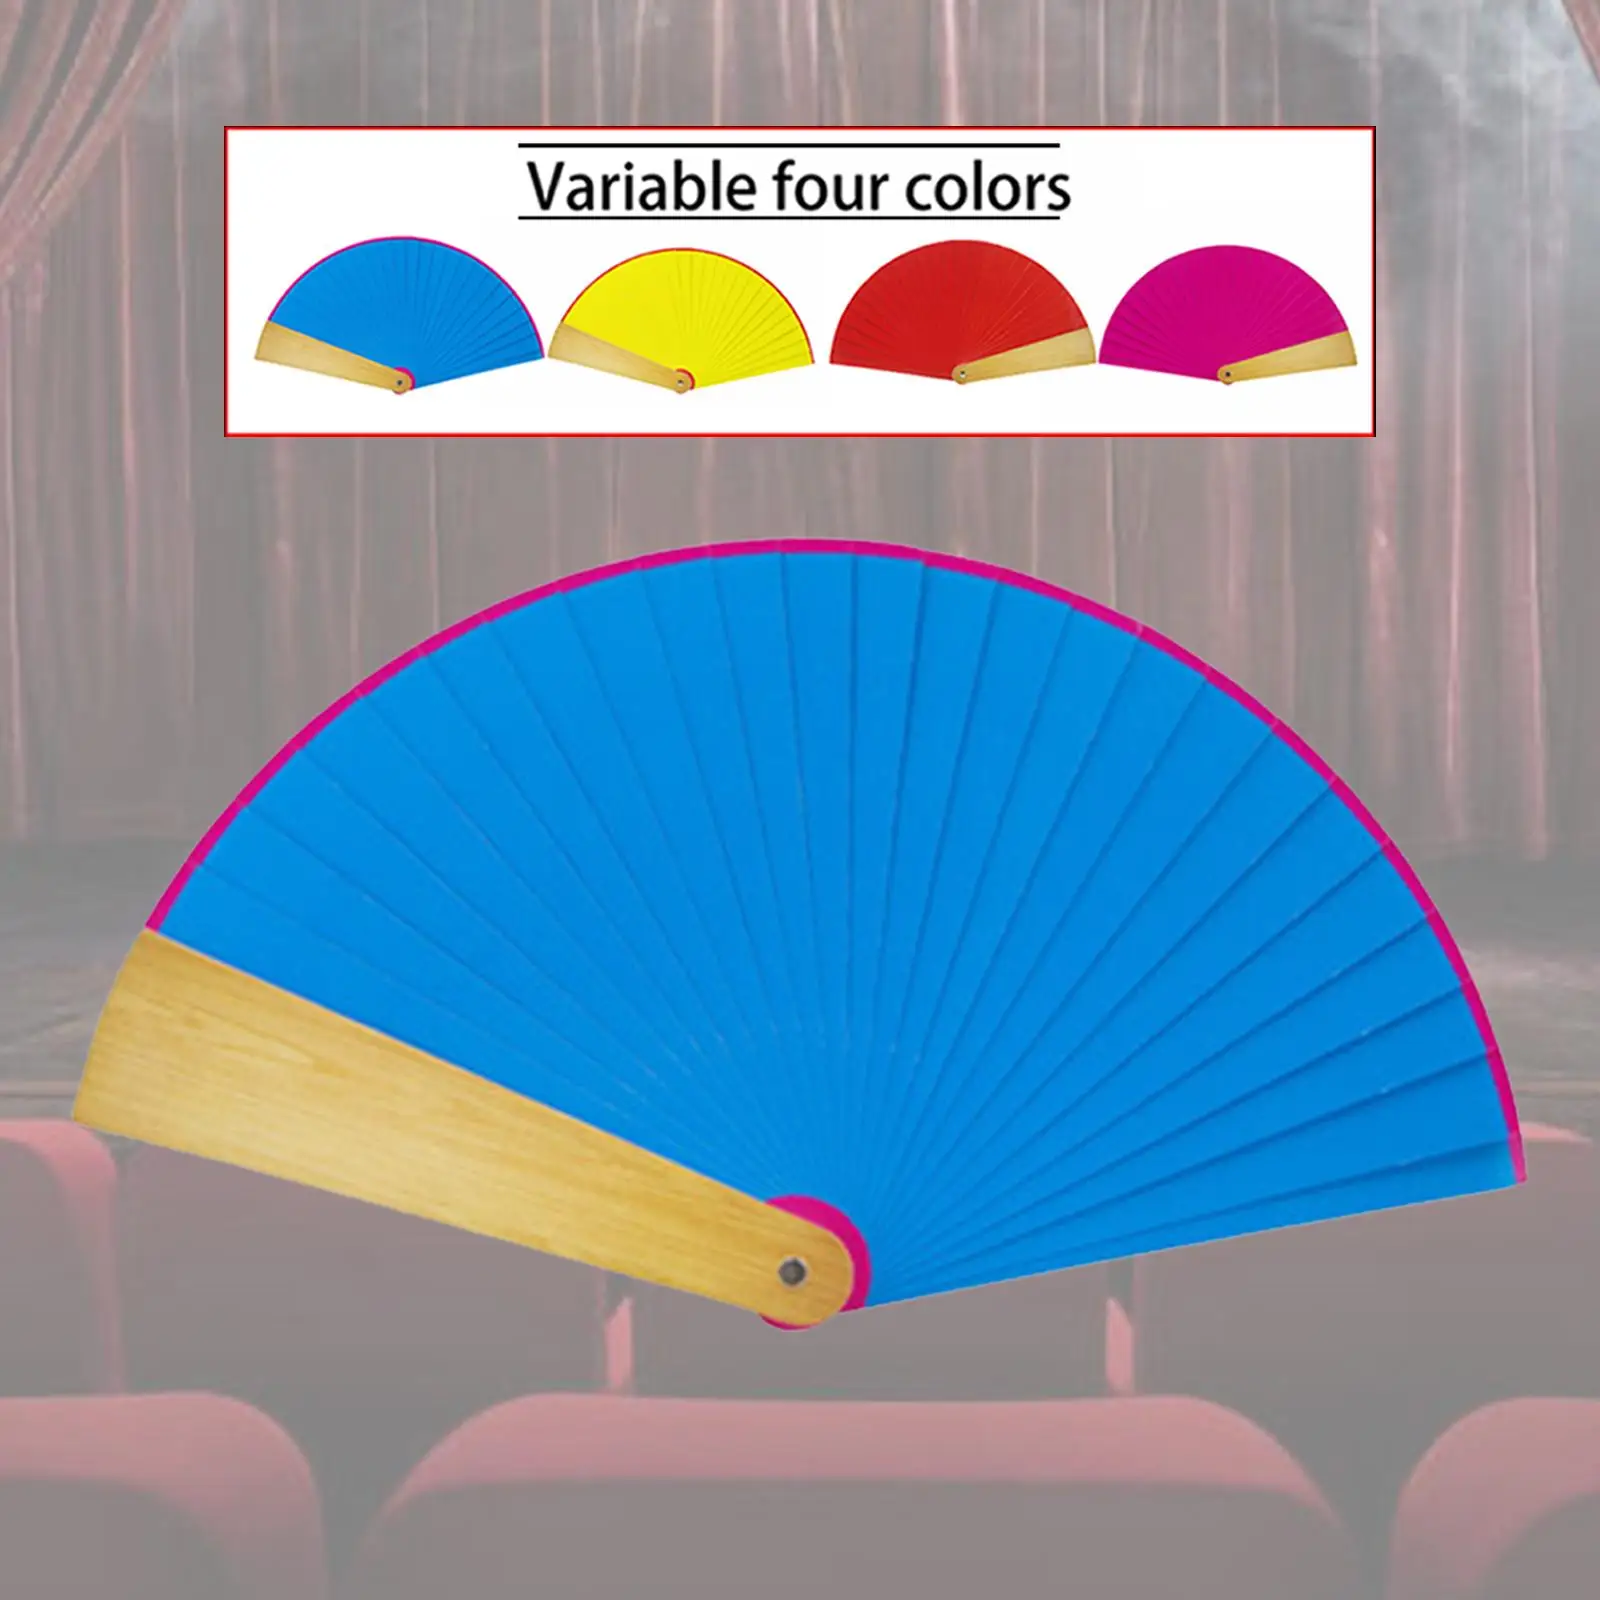 Magie Stage Illusions Party Gimmick Illusion Four Color Discolor for Party Magia Magician